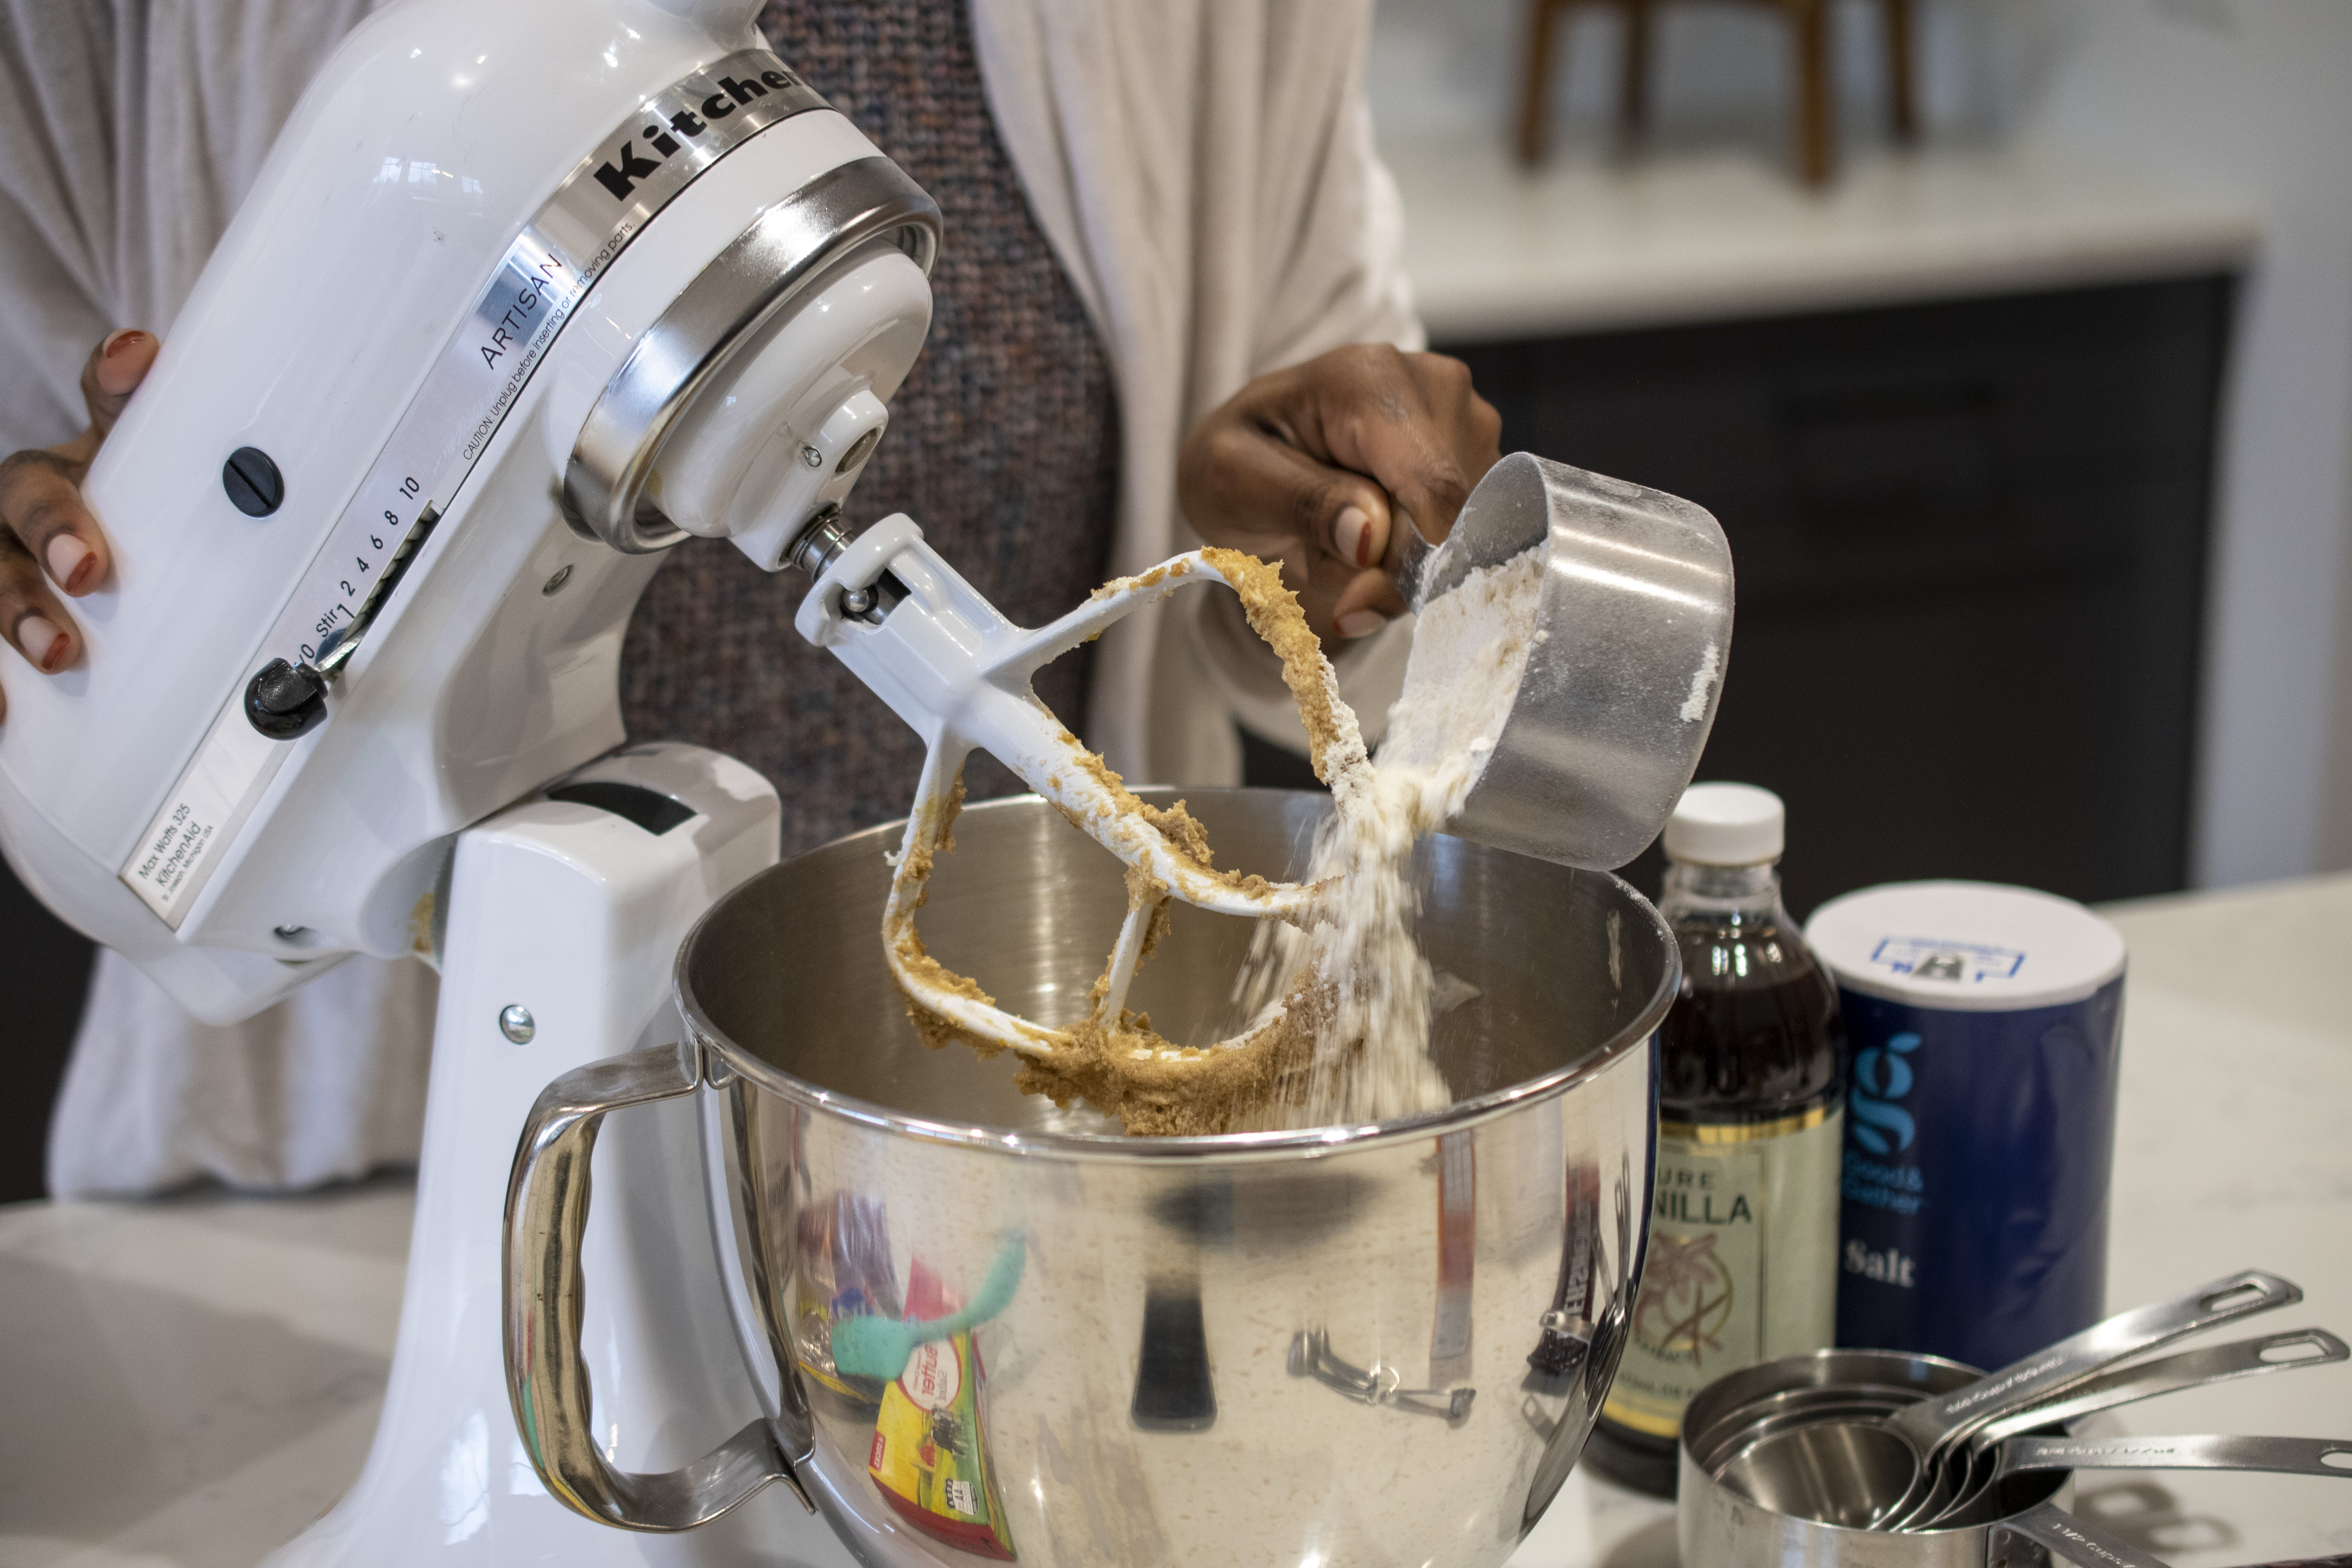 KitchenAid Mixer Attachment and/or Lawsuit Coming? - The Krazy Coupon Lady